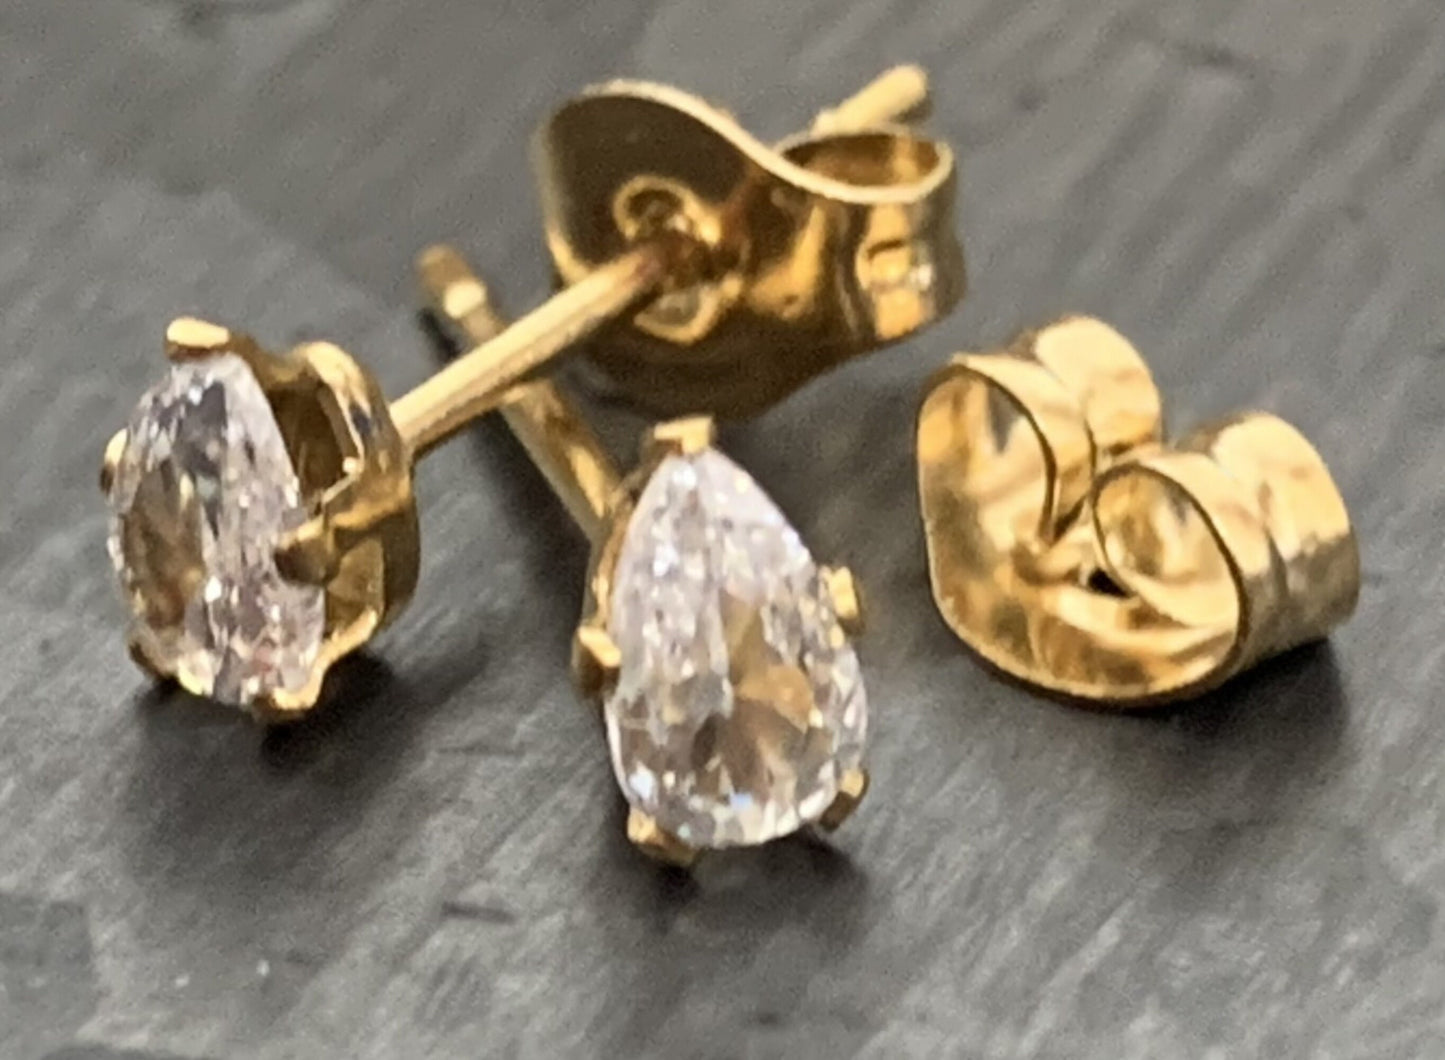 PAIR of Beautiful Hypoallergenic Clear CZ Gem Teardrop Gold Stud Earrings - 3mm, 4mm, 5mm, 6mm & 7mm Gem Size Available!